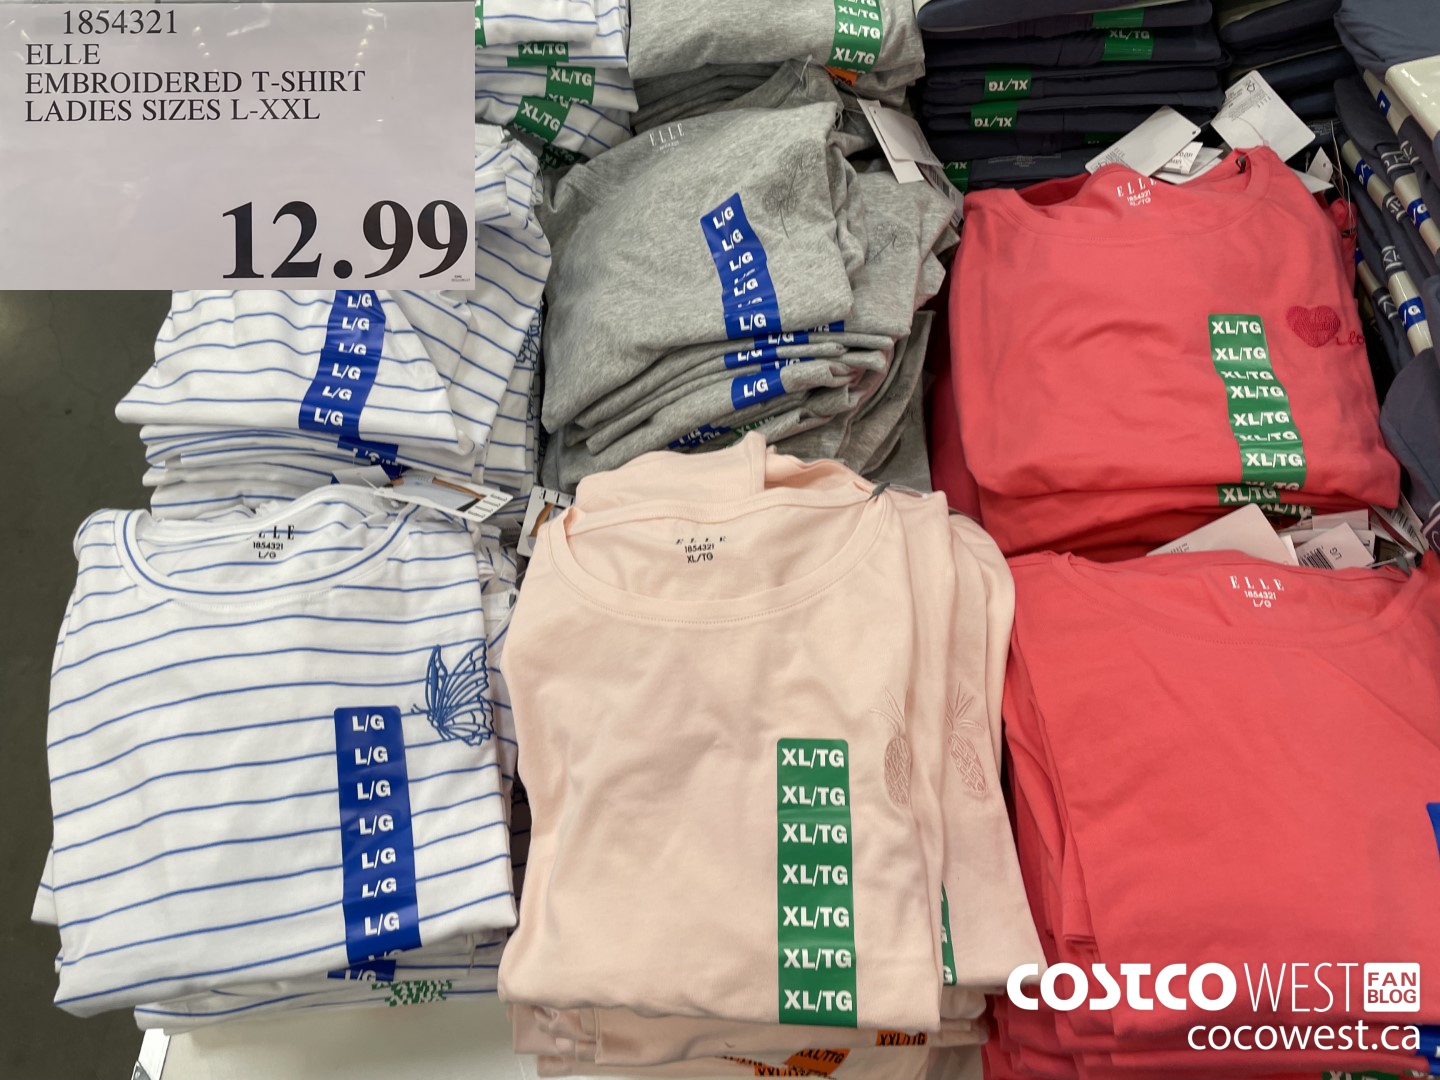 I spotted these 💯% cotton #LuckyBrand t-shirts at my local Costco